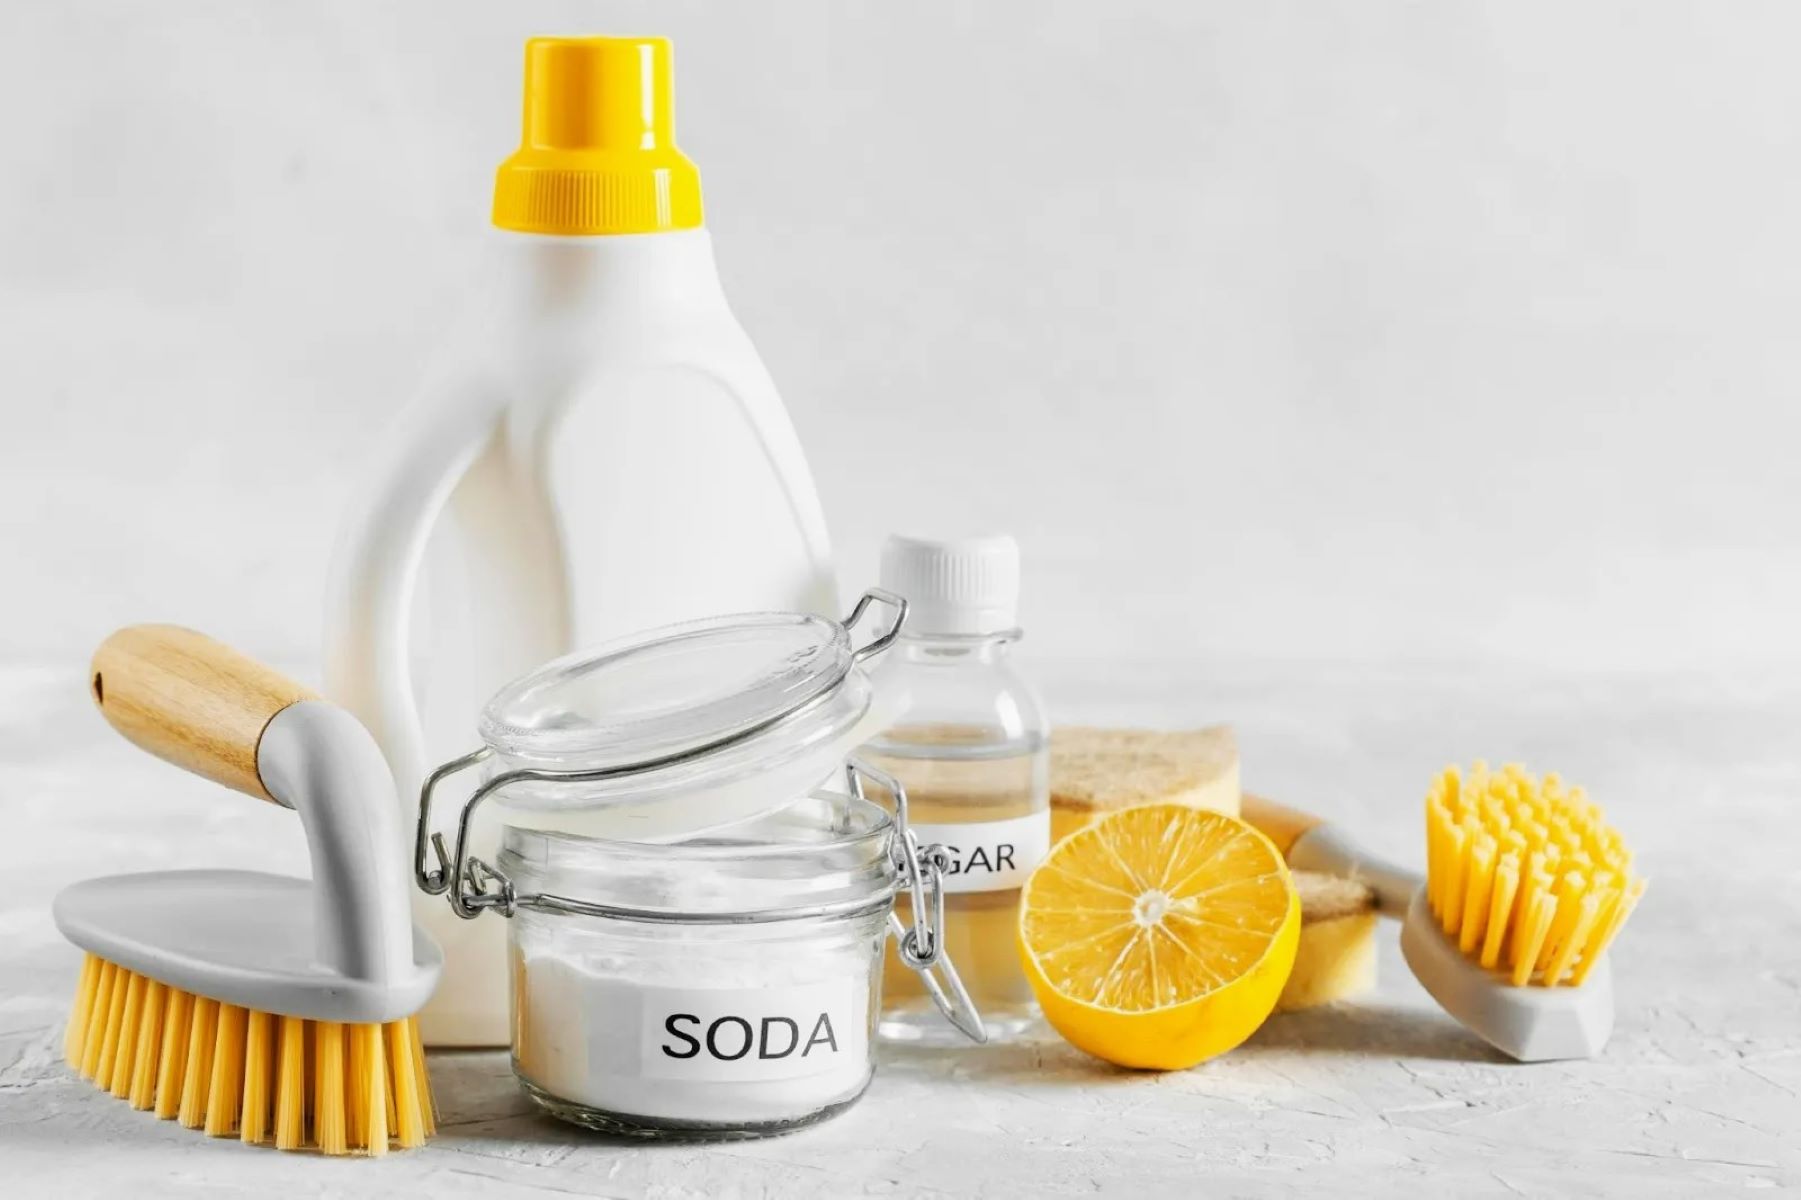 How To Clean A Washing Machine With Baking Soda